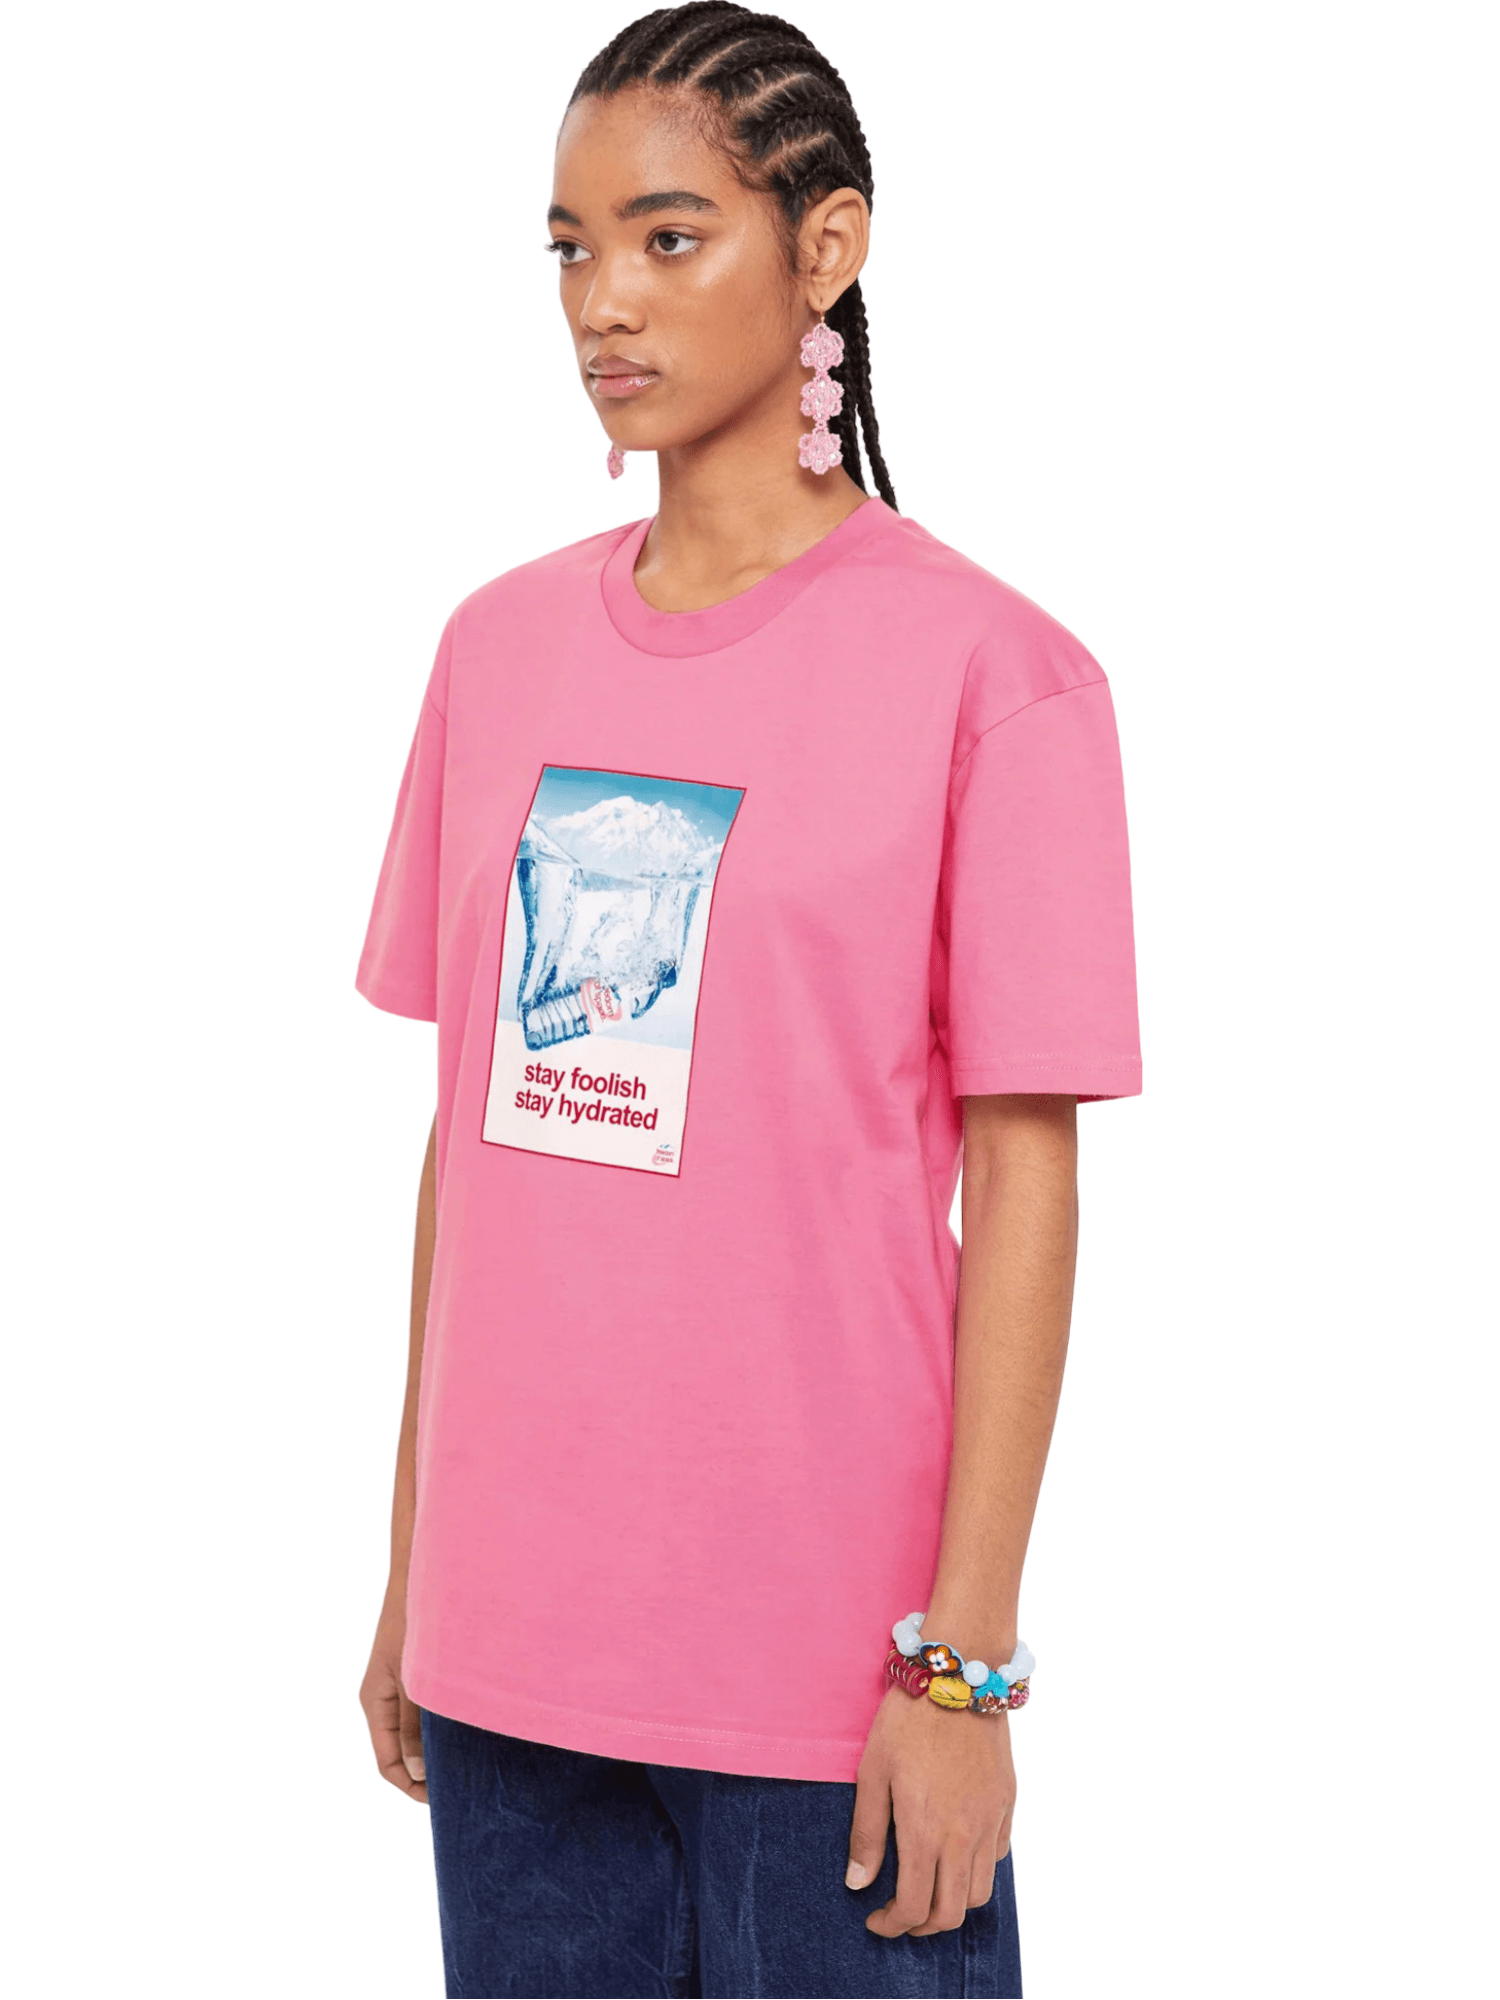 HYDRATED T-Shirt 